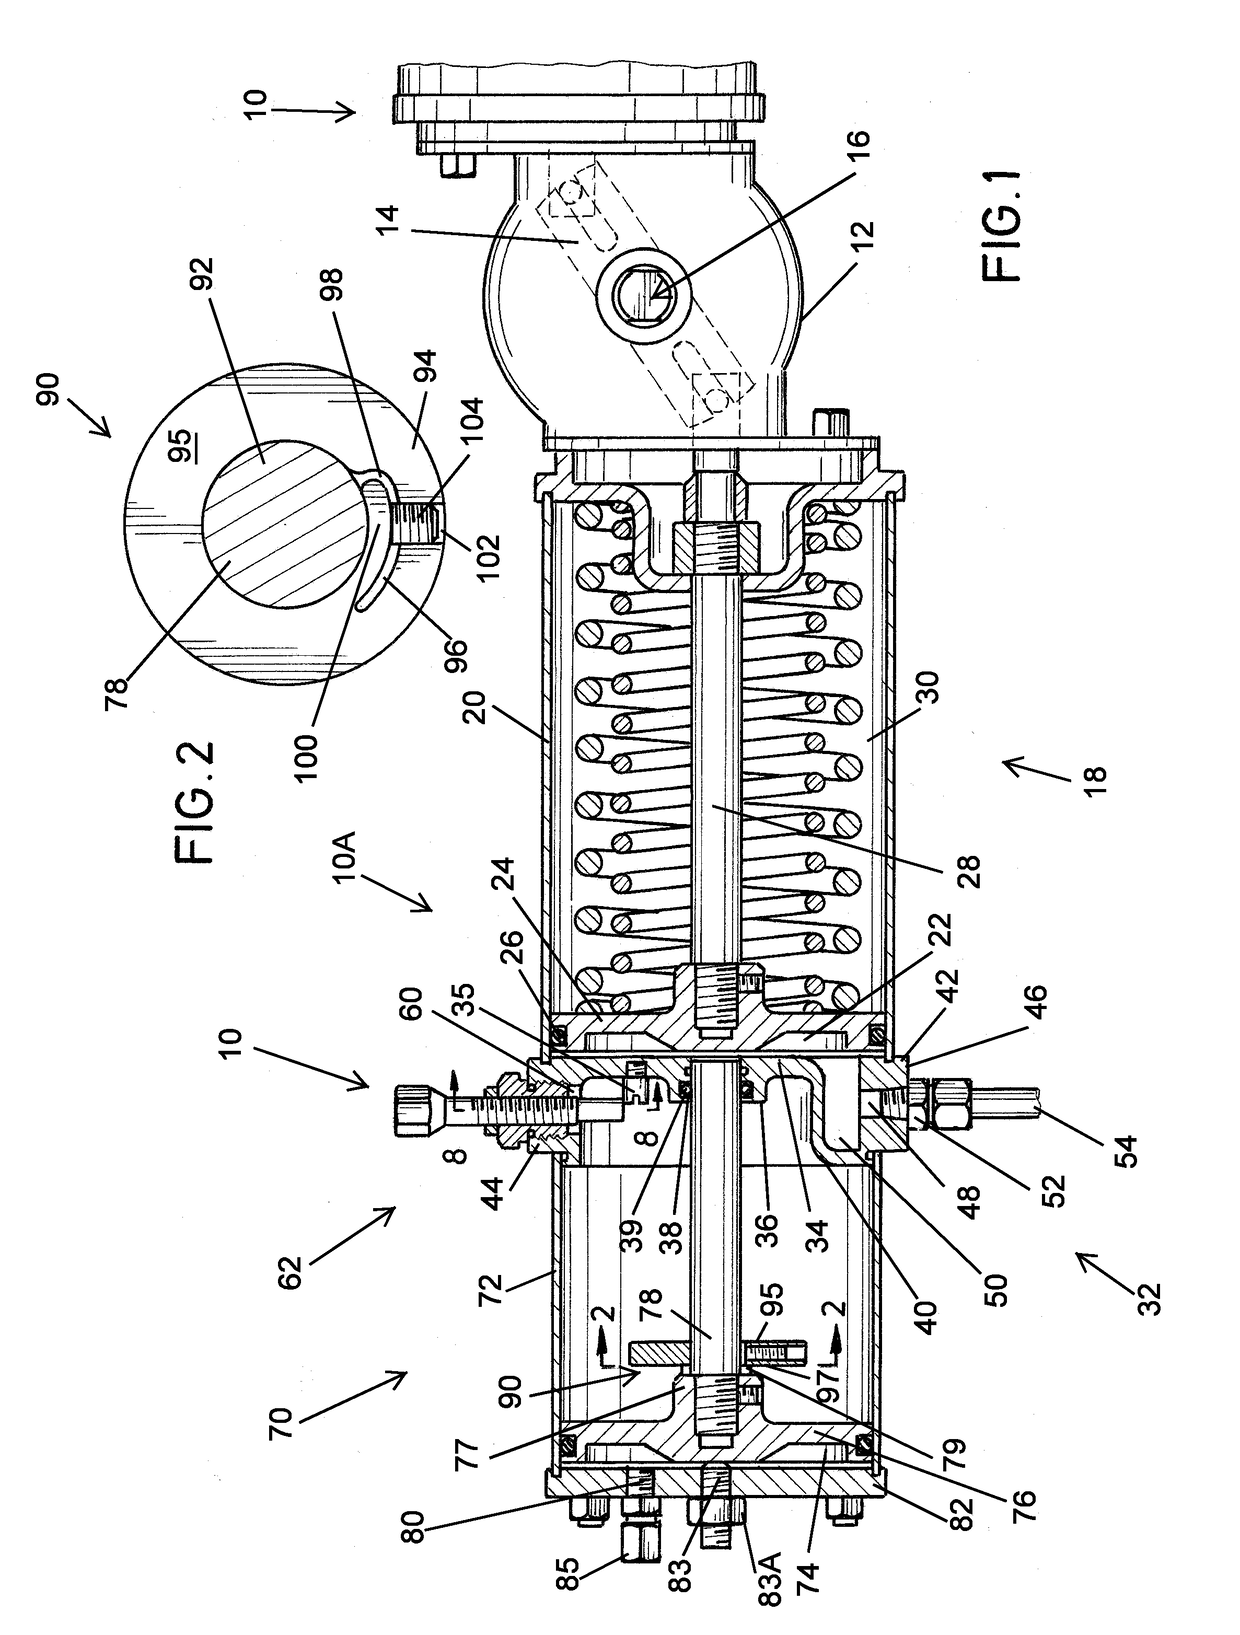 Actuator Assembly for Conducting Partial Stroke Testing